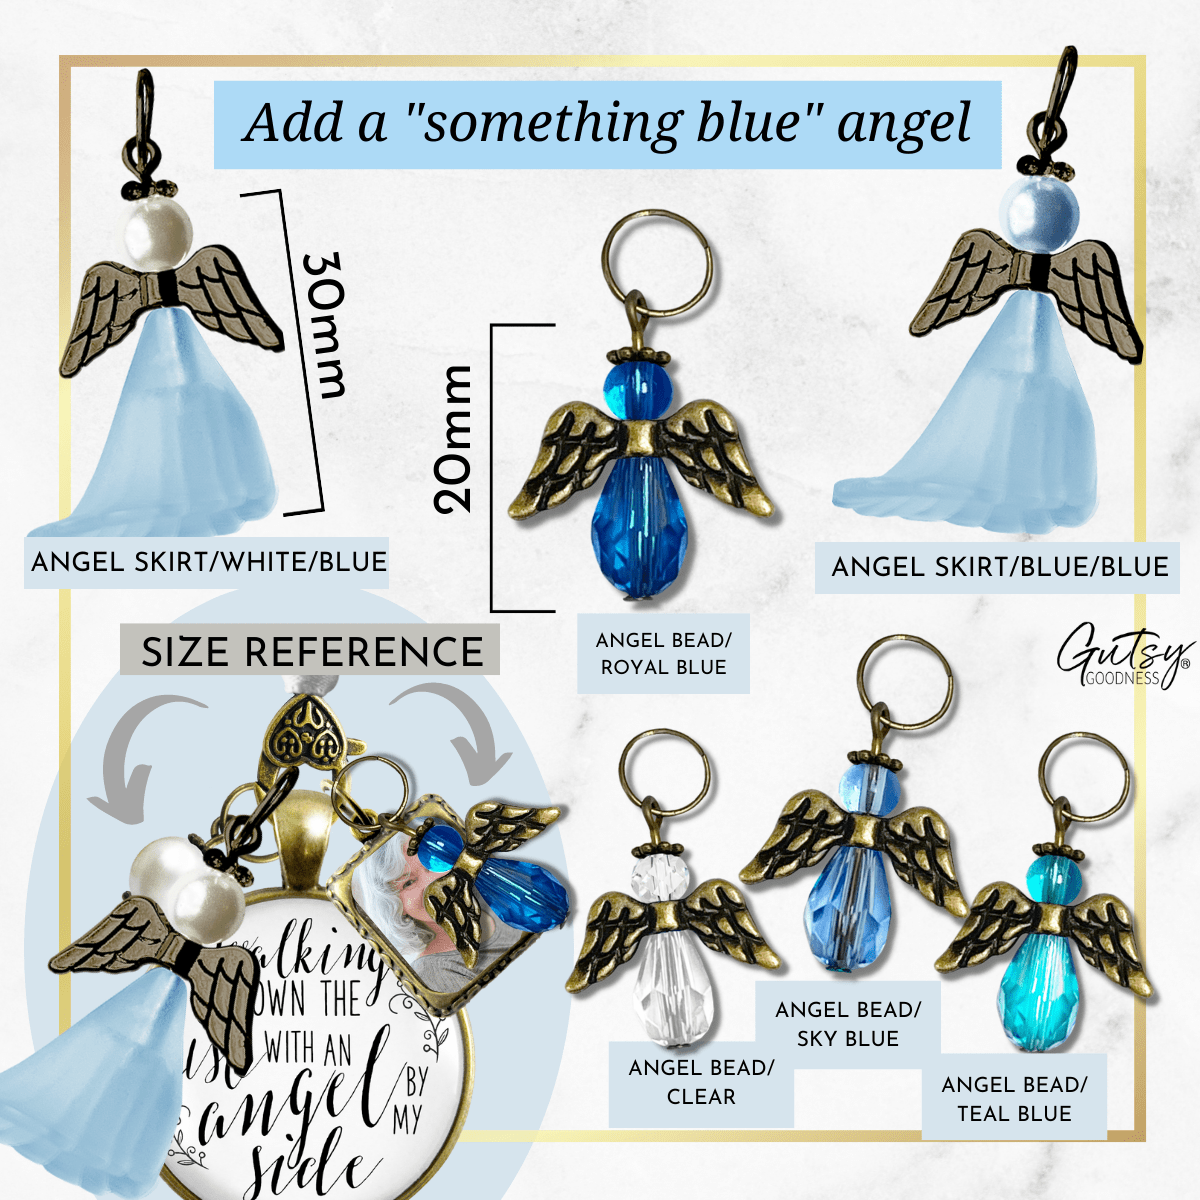 Walking Down The Aisle With An Angel By My Side - Memorial Bouquet Charm, Bronze, White Glass, Blue Pearl - 1 Frame  Bouquet Charm - Gutsy Goodness Handmade Jewelry